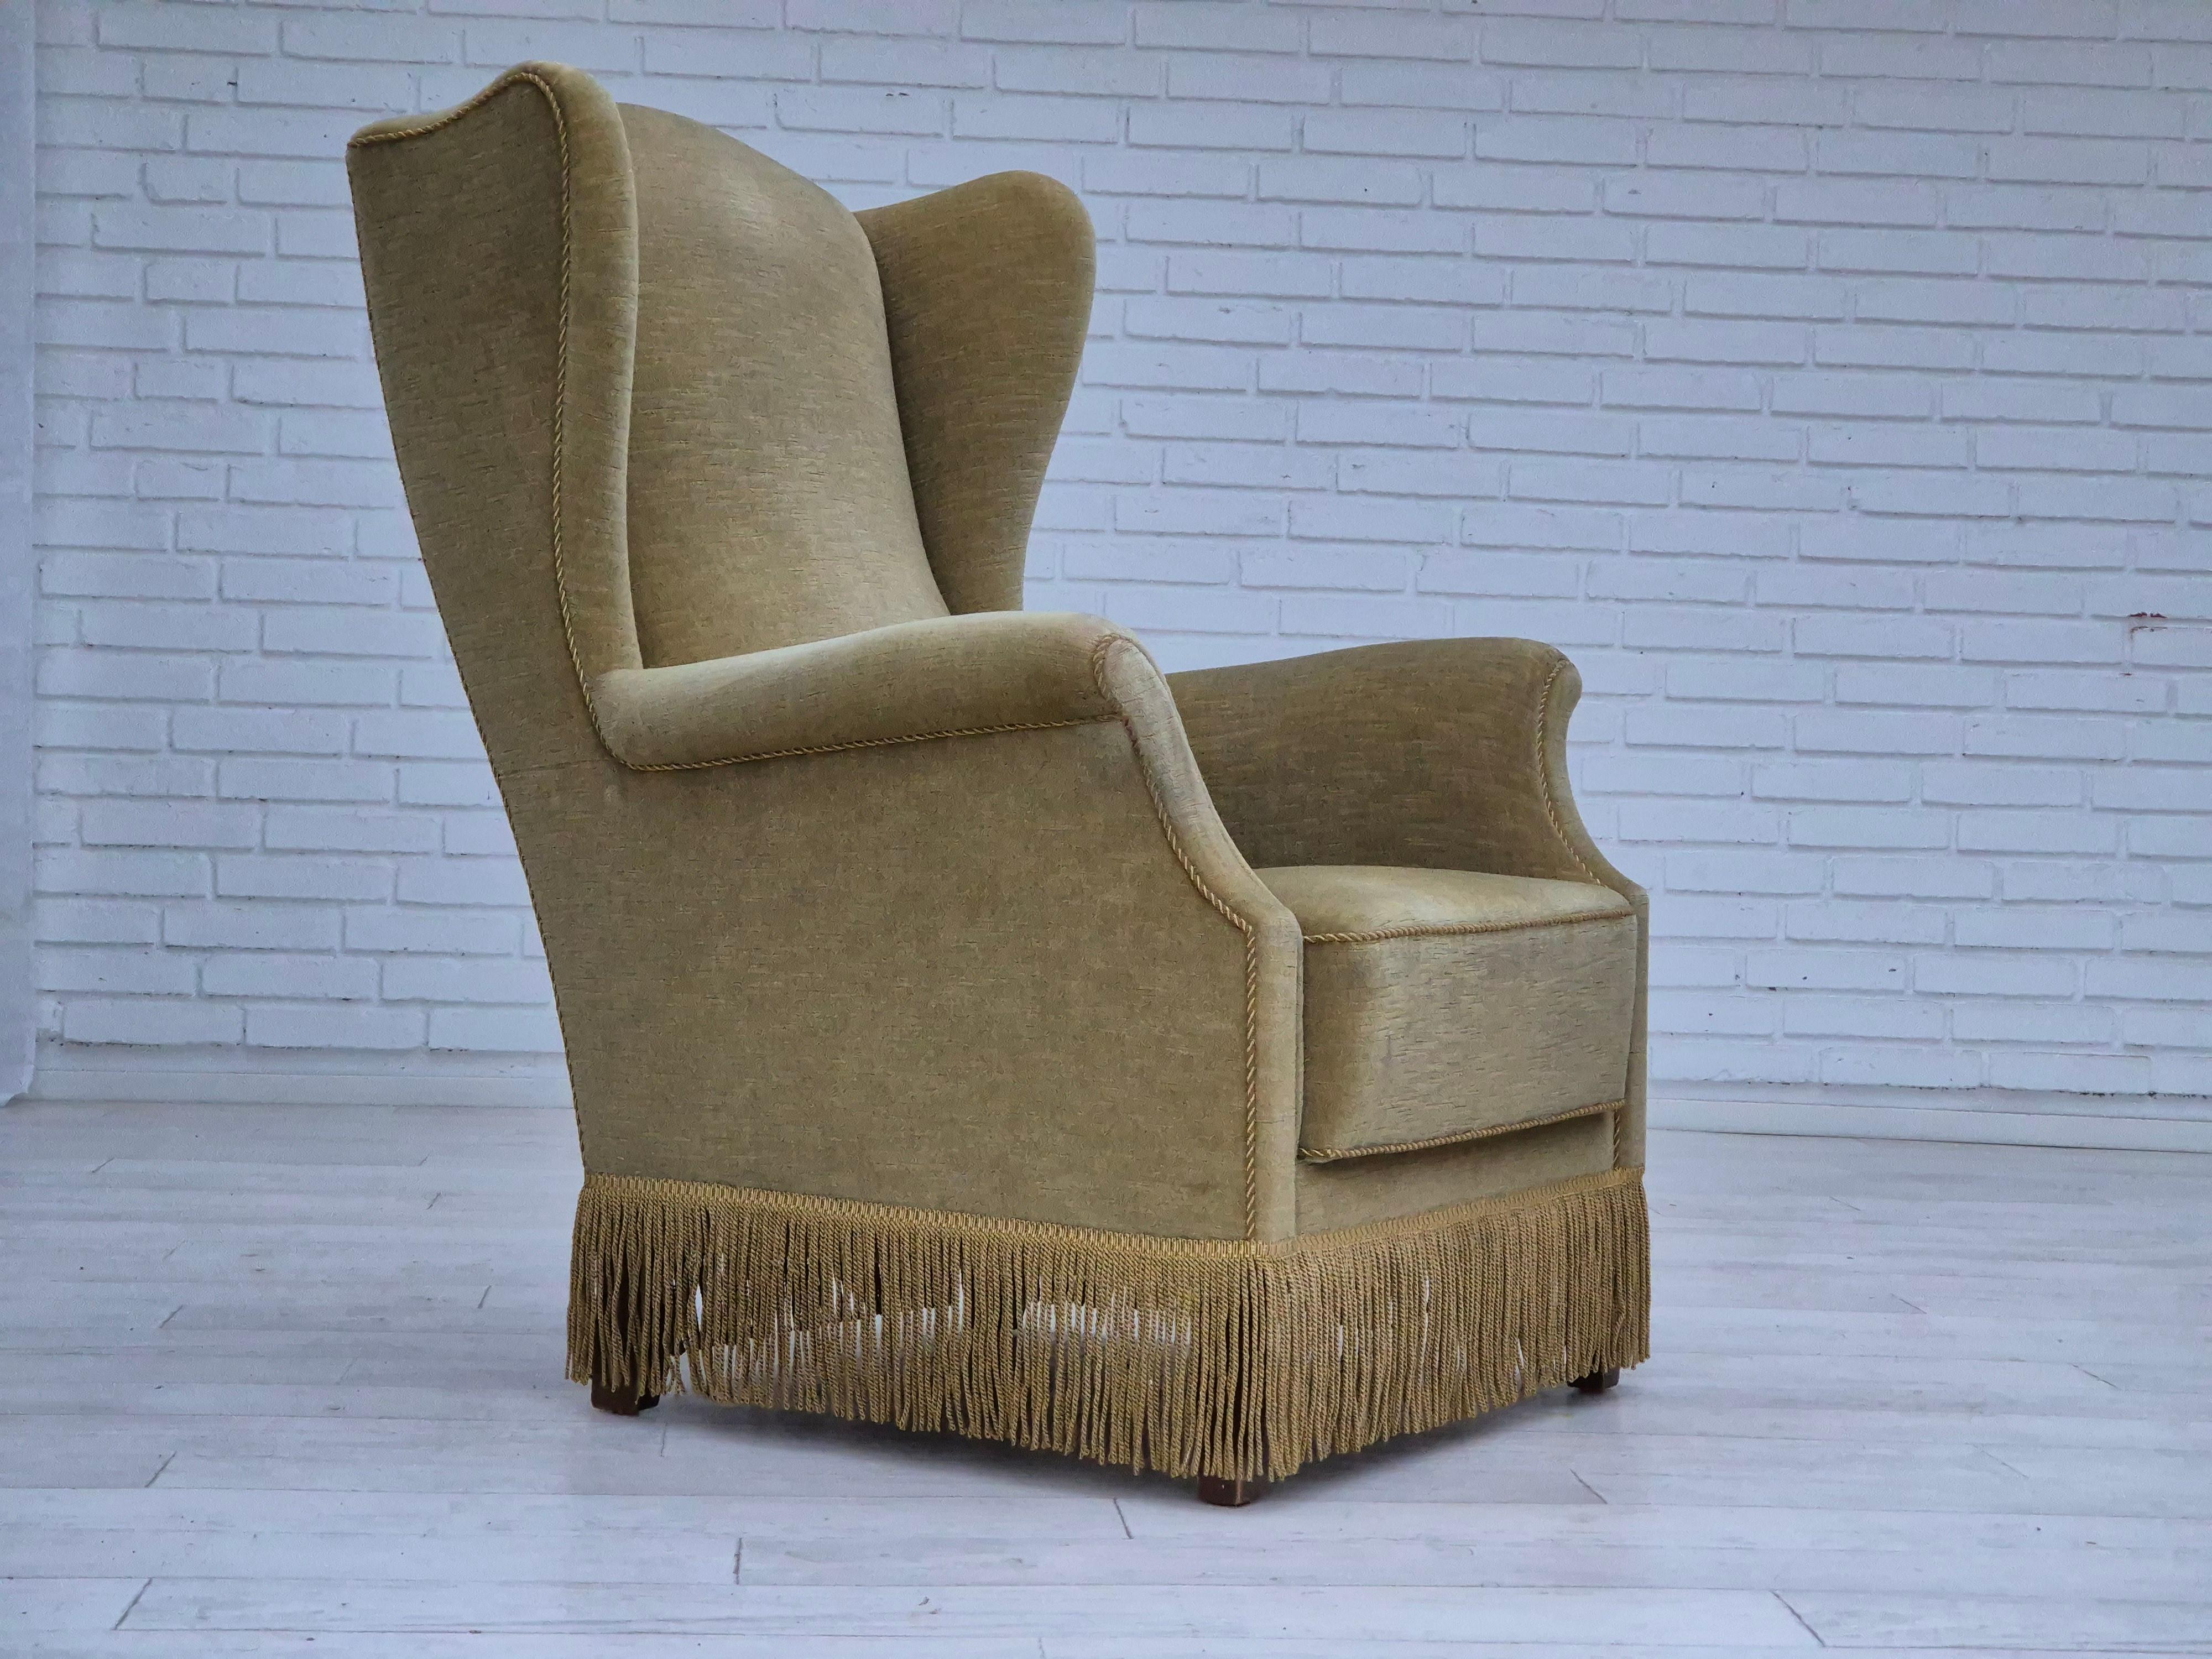 1970s, Danish design. Wingback armchair in original very good condition: no smells and no stains. Light green furniture velour. Beech wood legs. Springs in the seat. Manufactured by Danish furniture manufacturer in about 1970s.